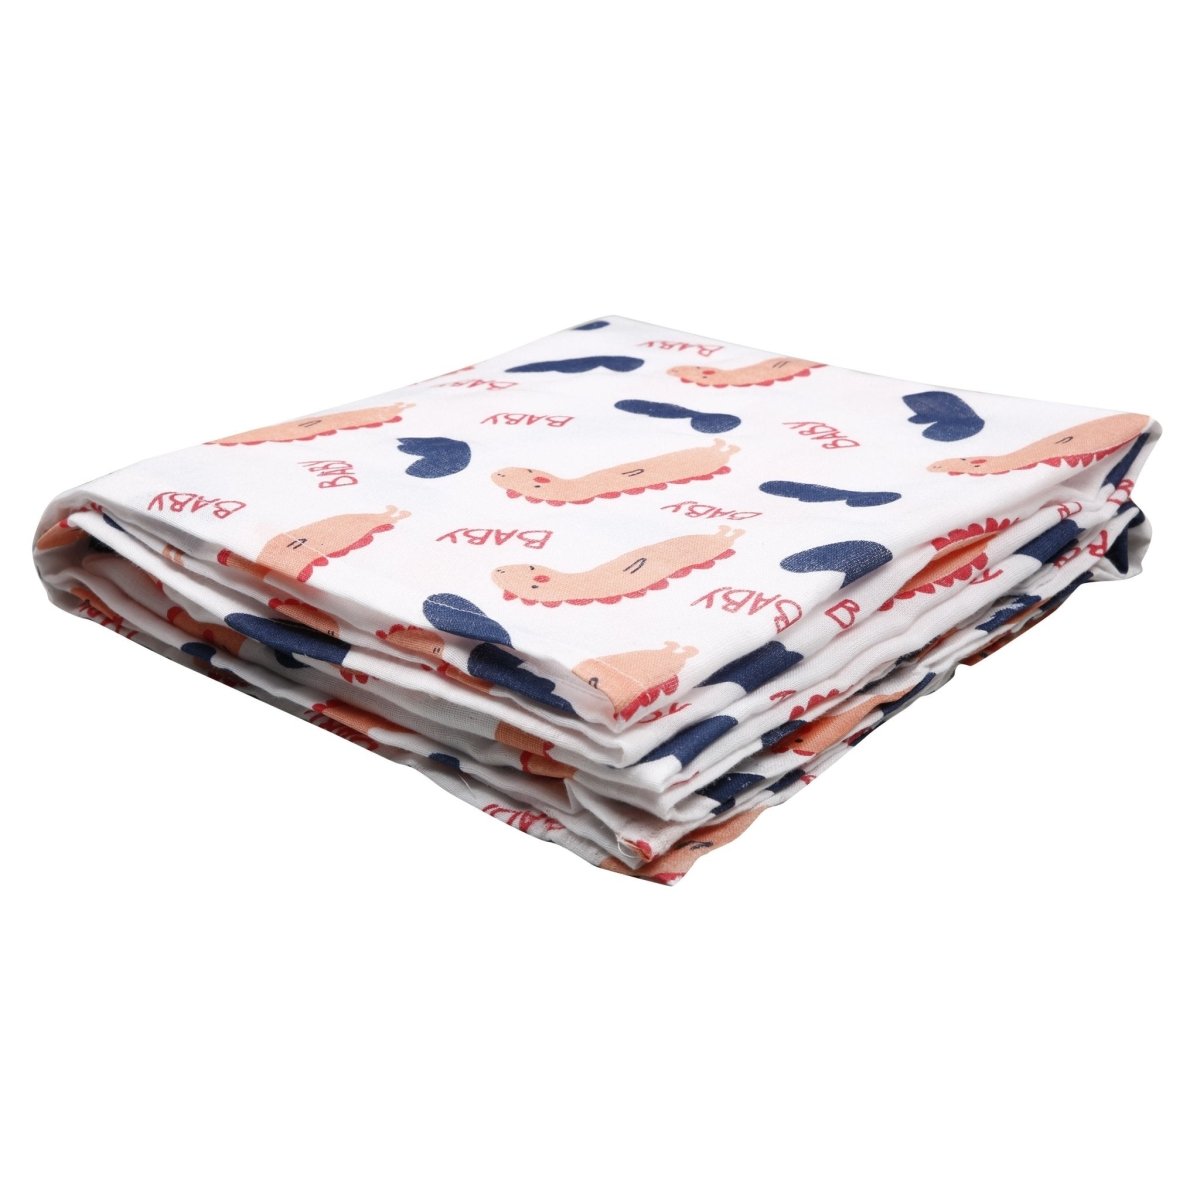 Baby Swaddle Wrap- Baby Dino - MS-BYDN